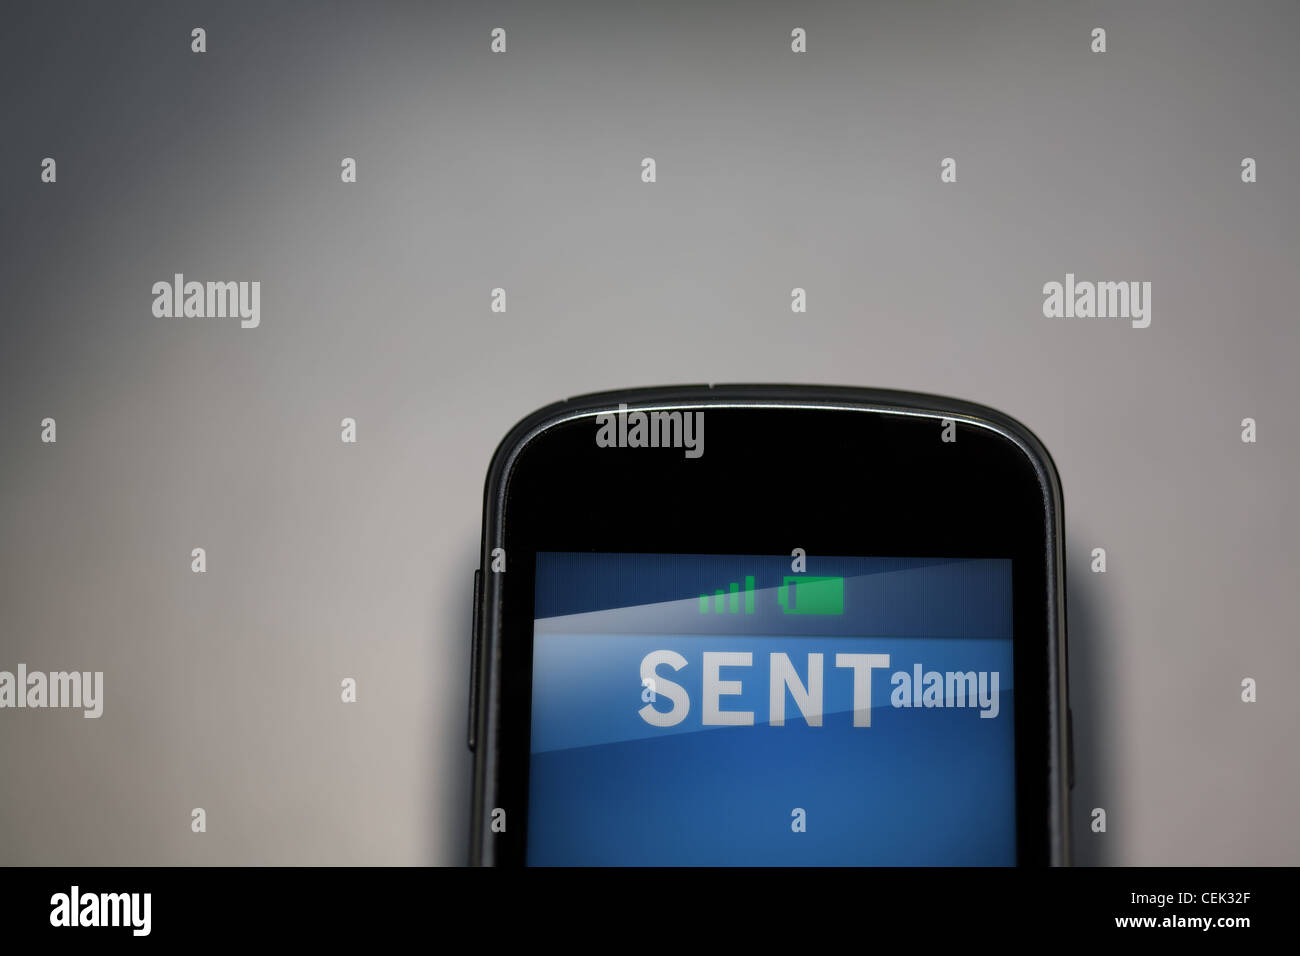 A mobile phone with sent message on the screen Stock Photo